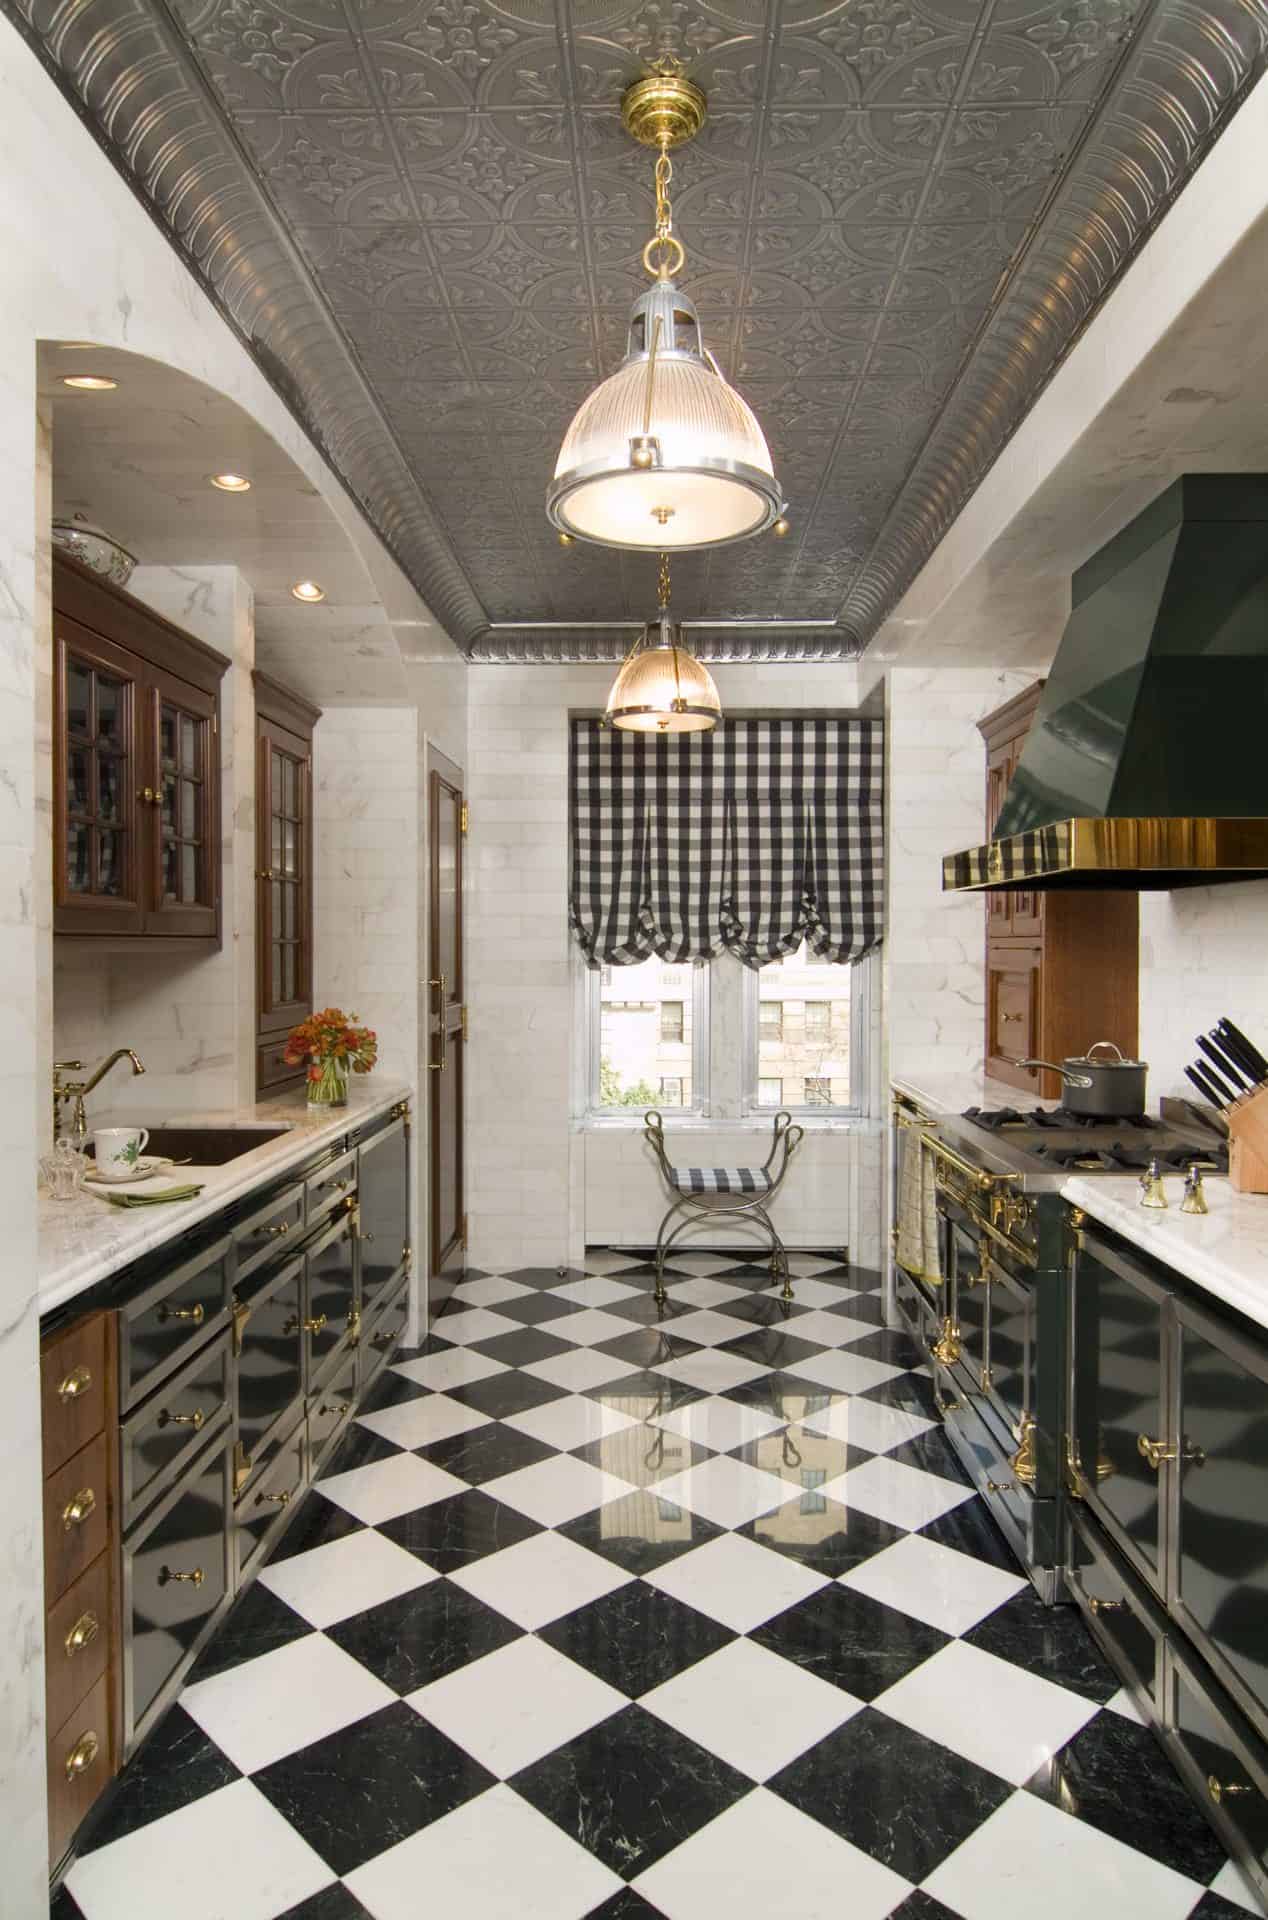 Galley kitchen features custom Bilotta cabinetry, checkerboard floor pattern and vintage pendant lights. 